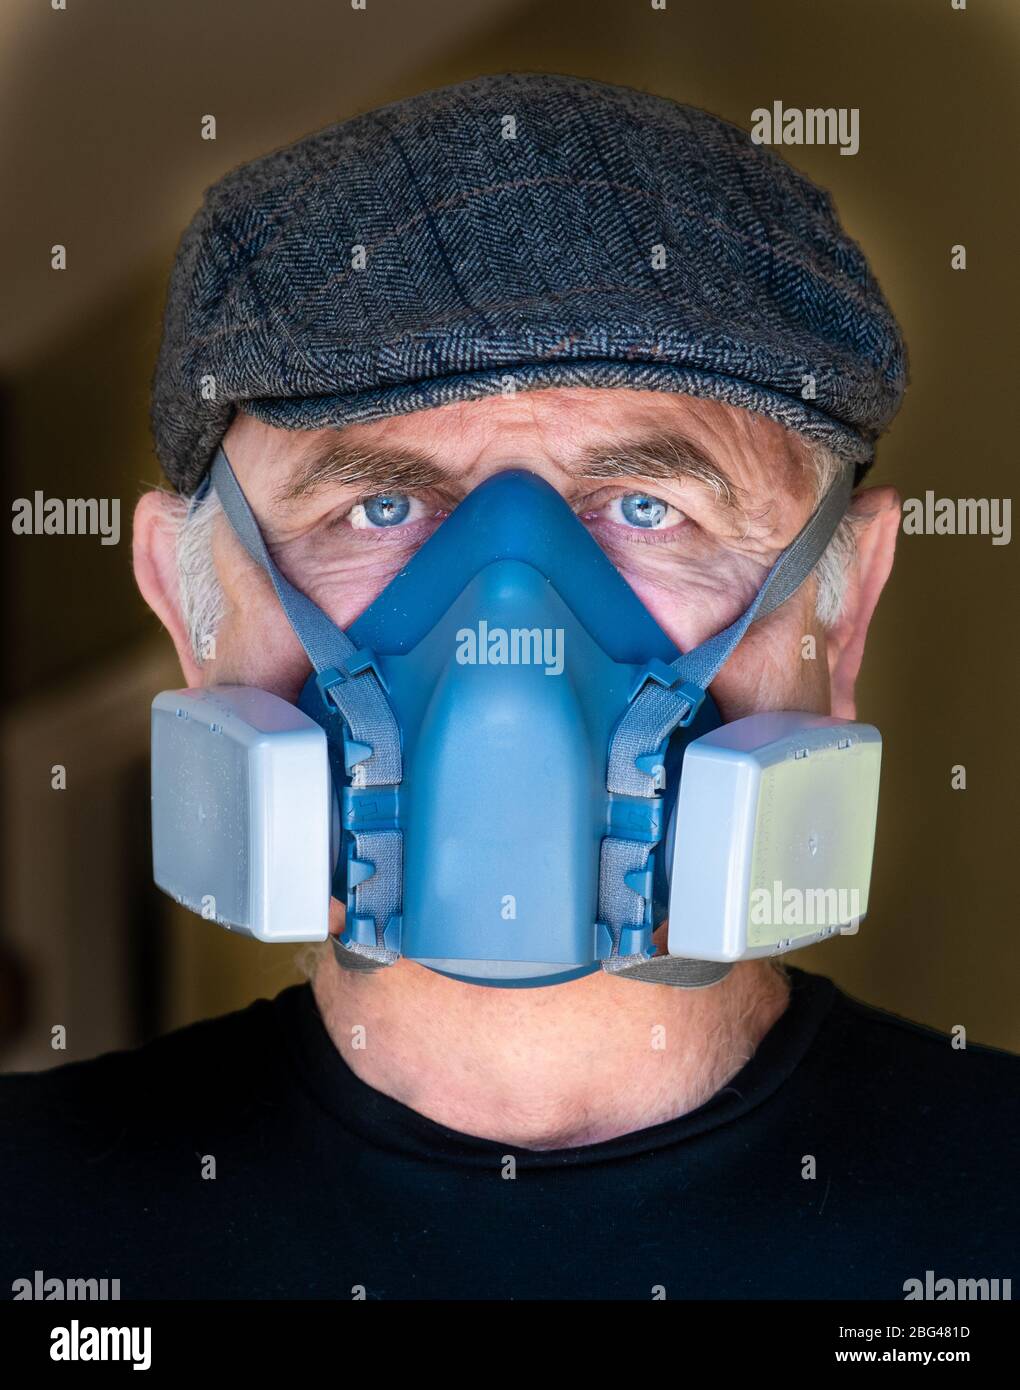 Portrait of a man wearing a HEPA filter mask Stock Photo